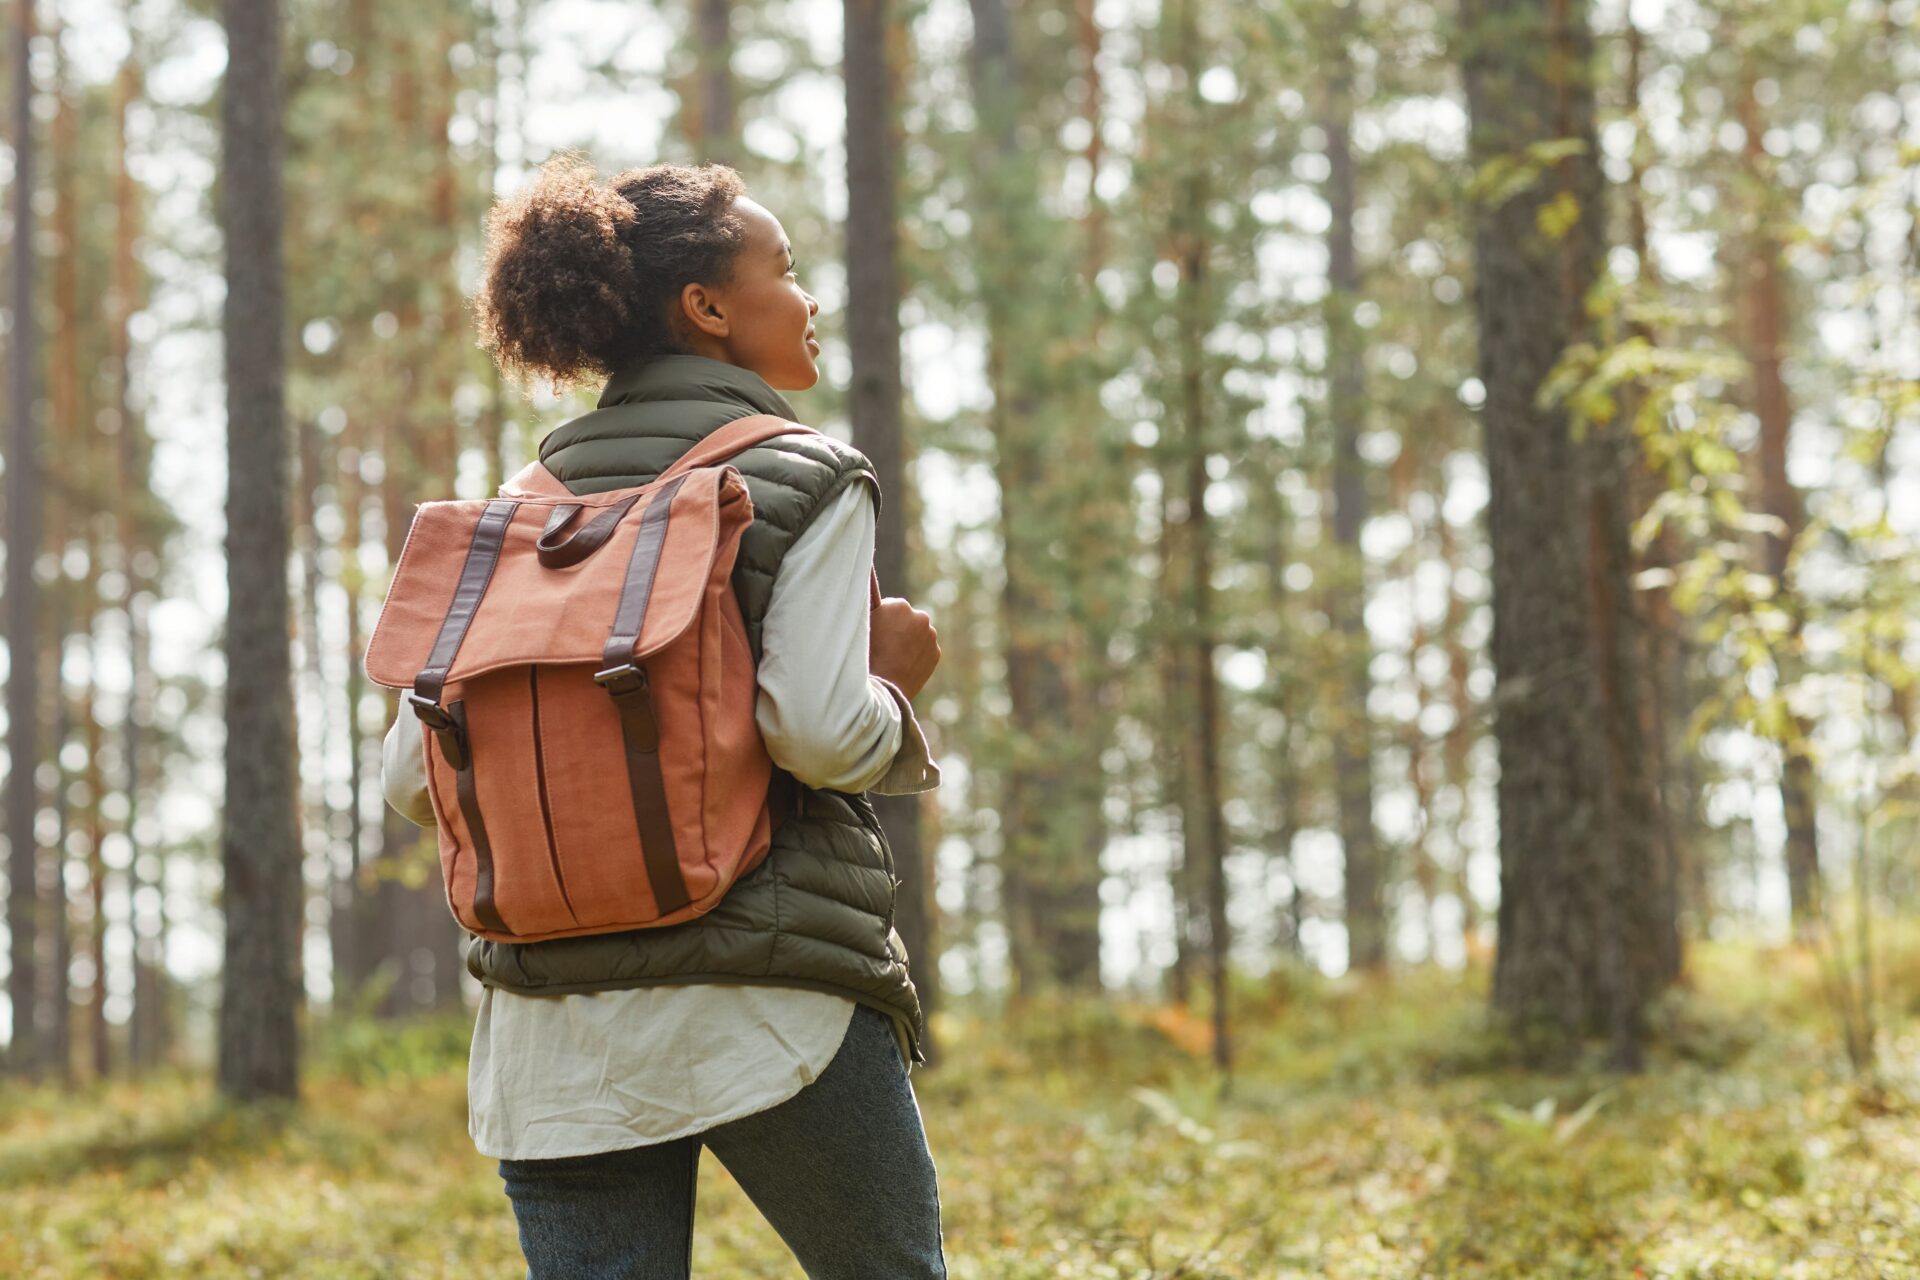 A young woman with an orange backpack hiking in the forest.